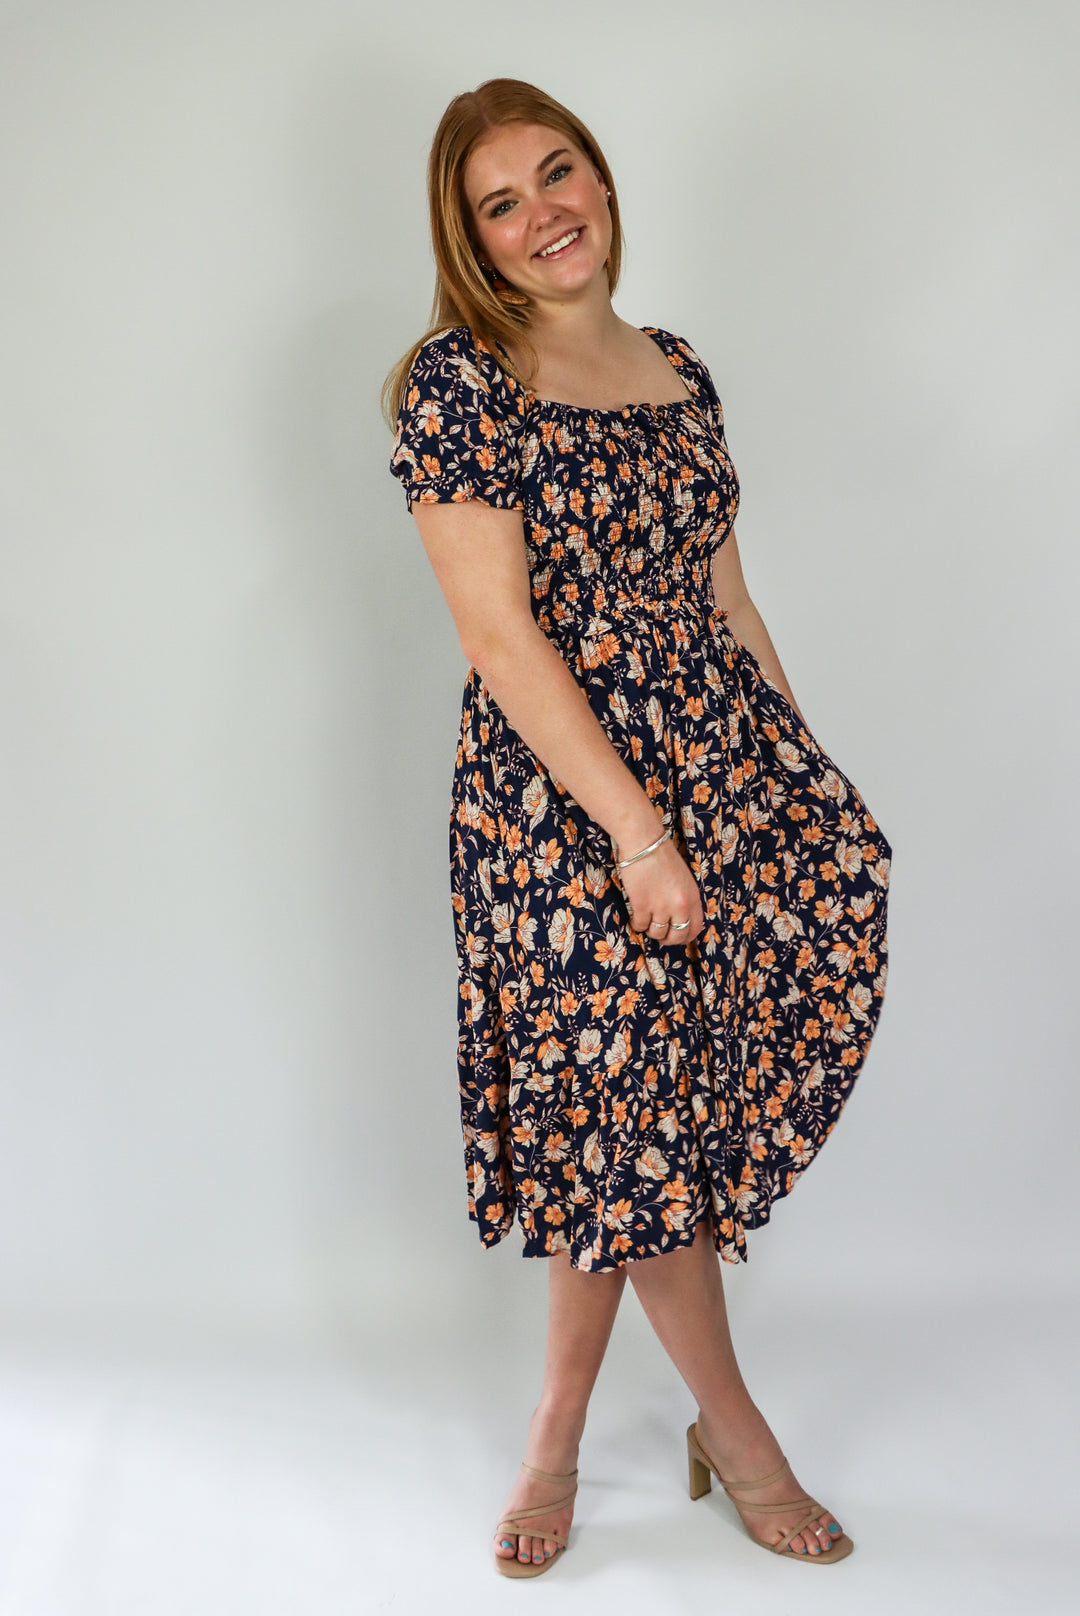 Tracey Floral print dress